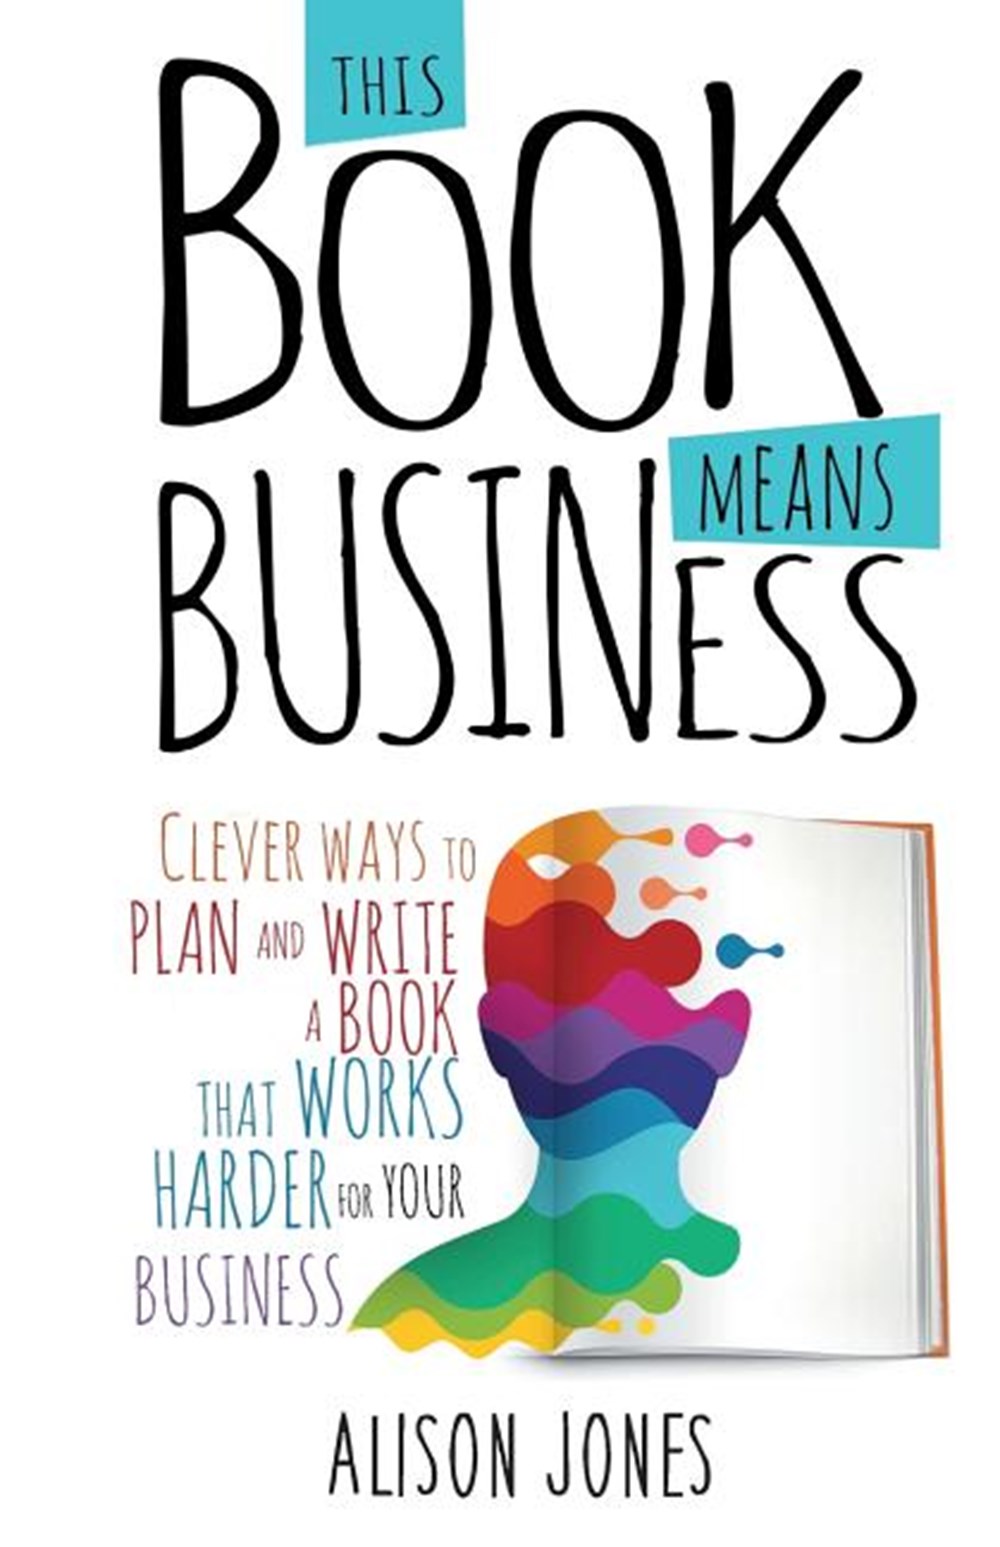 This Book Means Business Clever ways to plan and write a book that works harder for your business